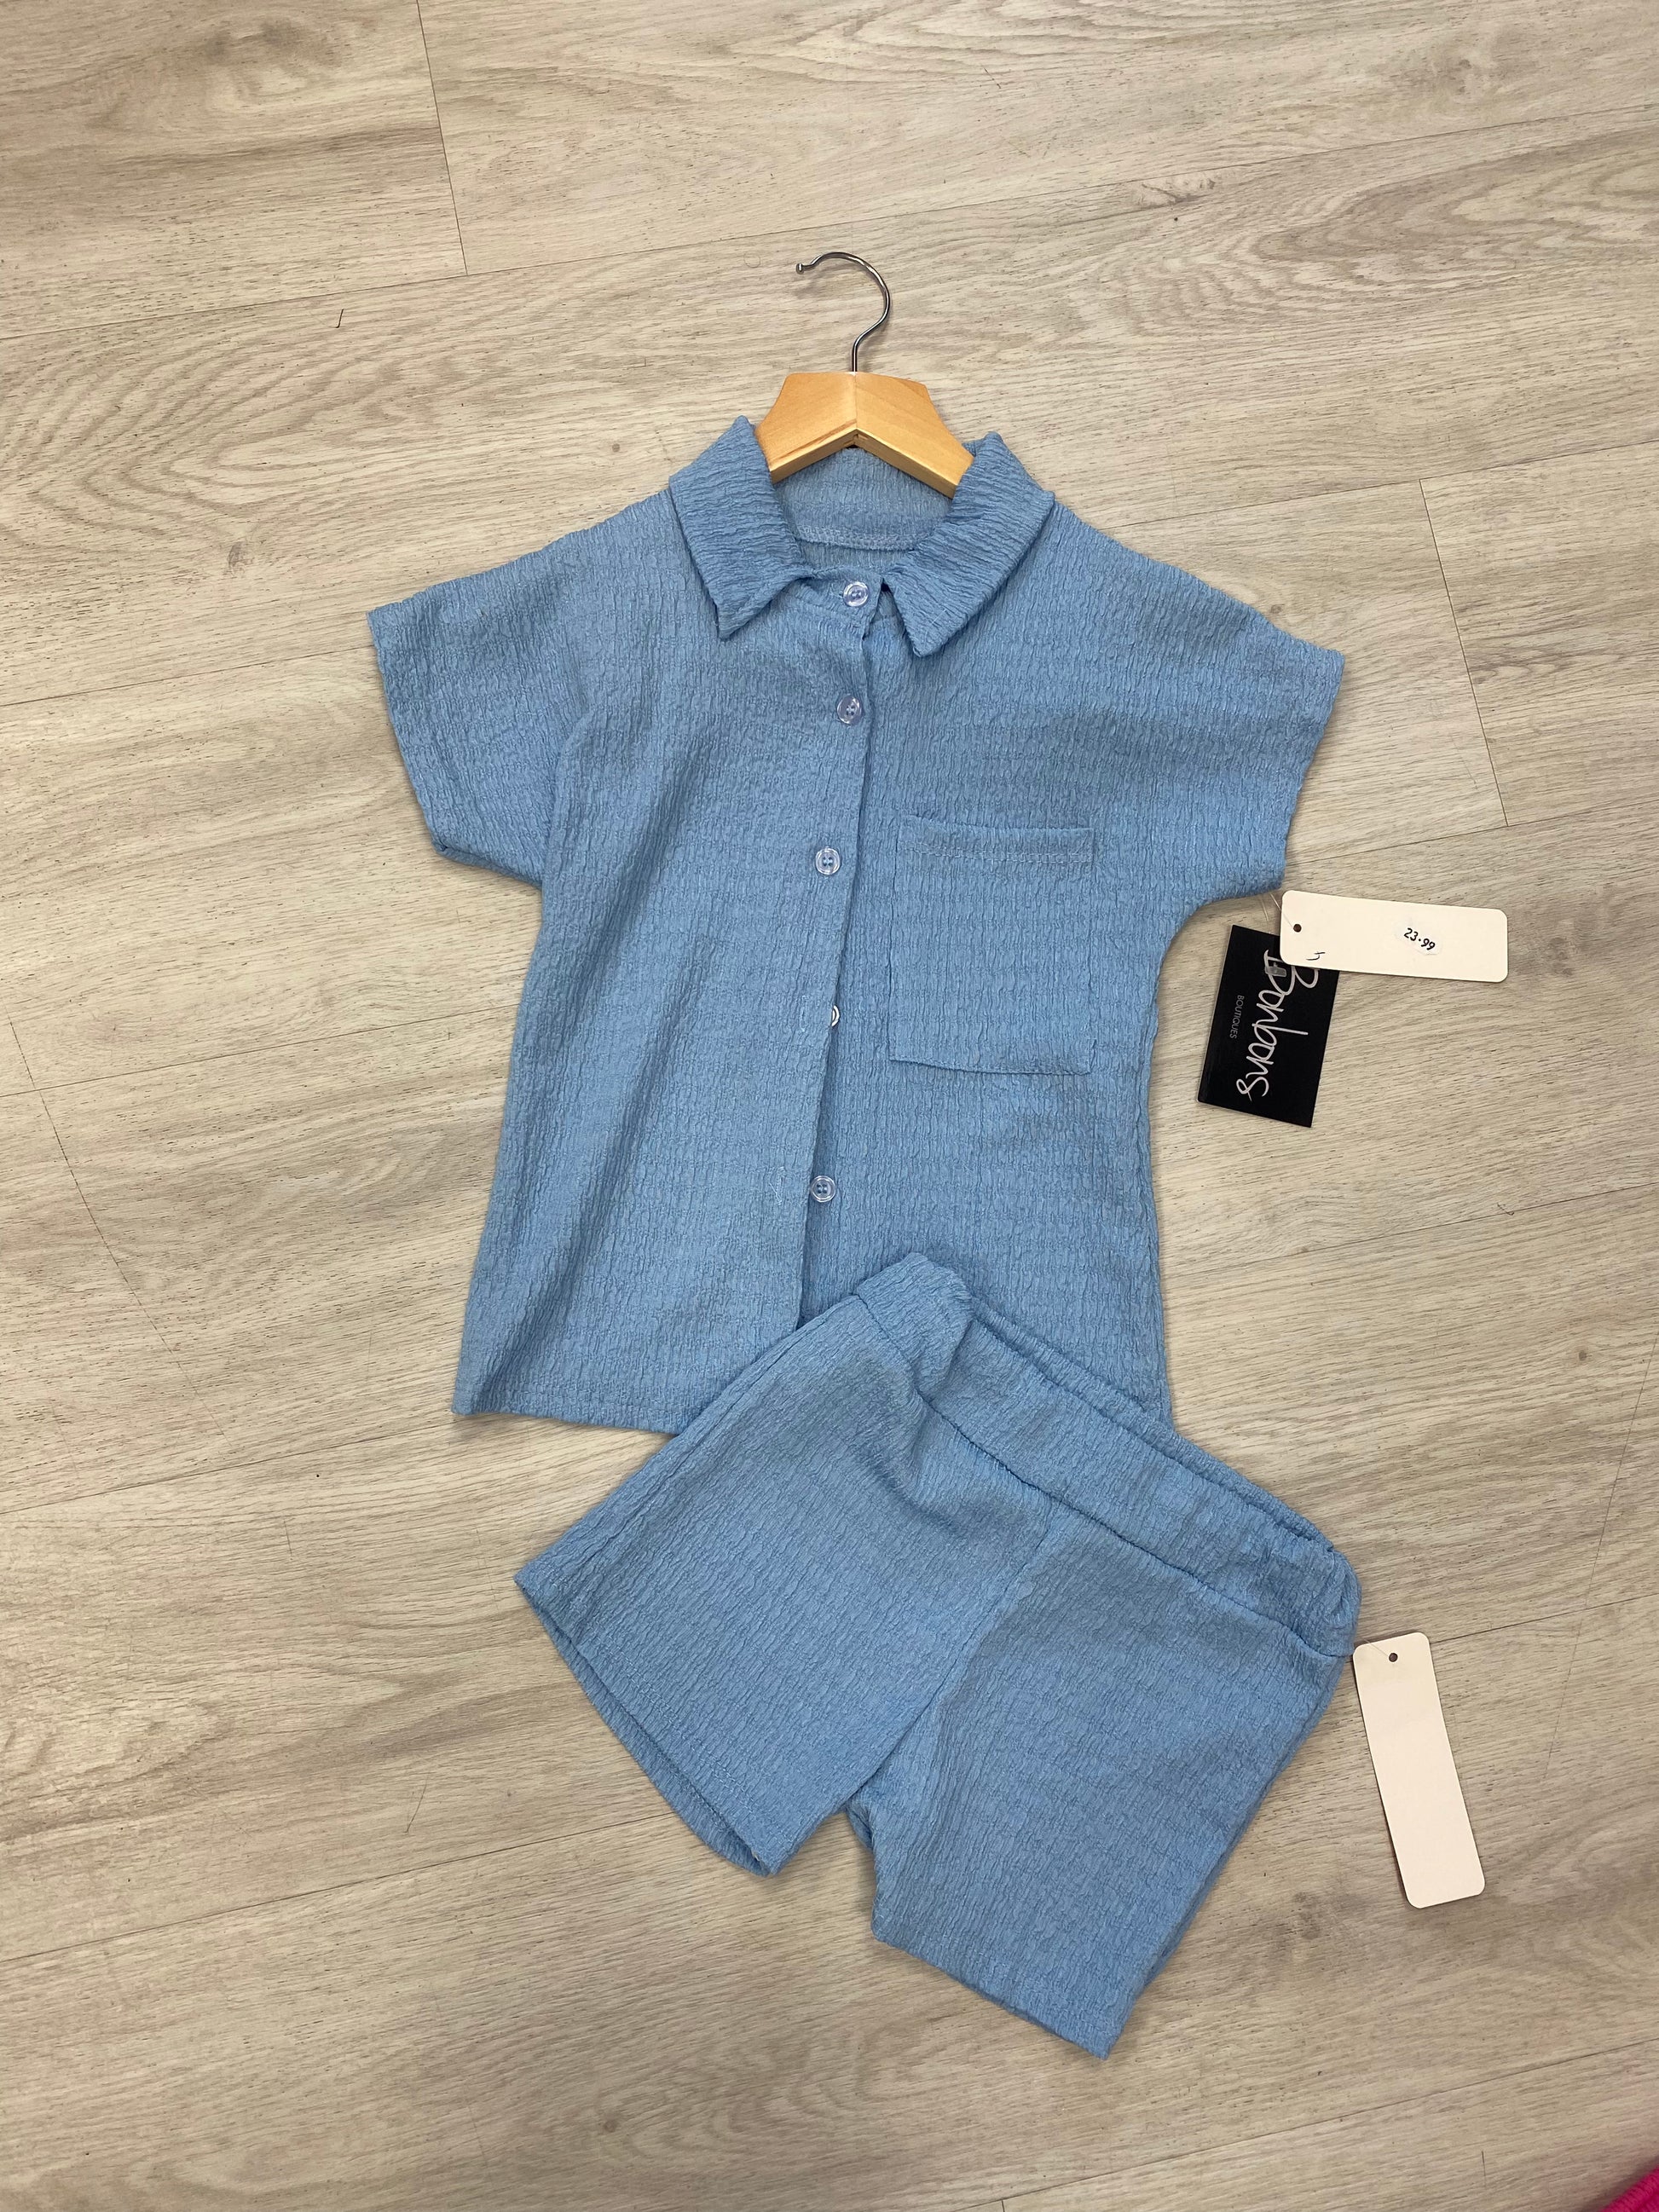 Dot Kids Shirt and Short Cheesecloth